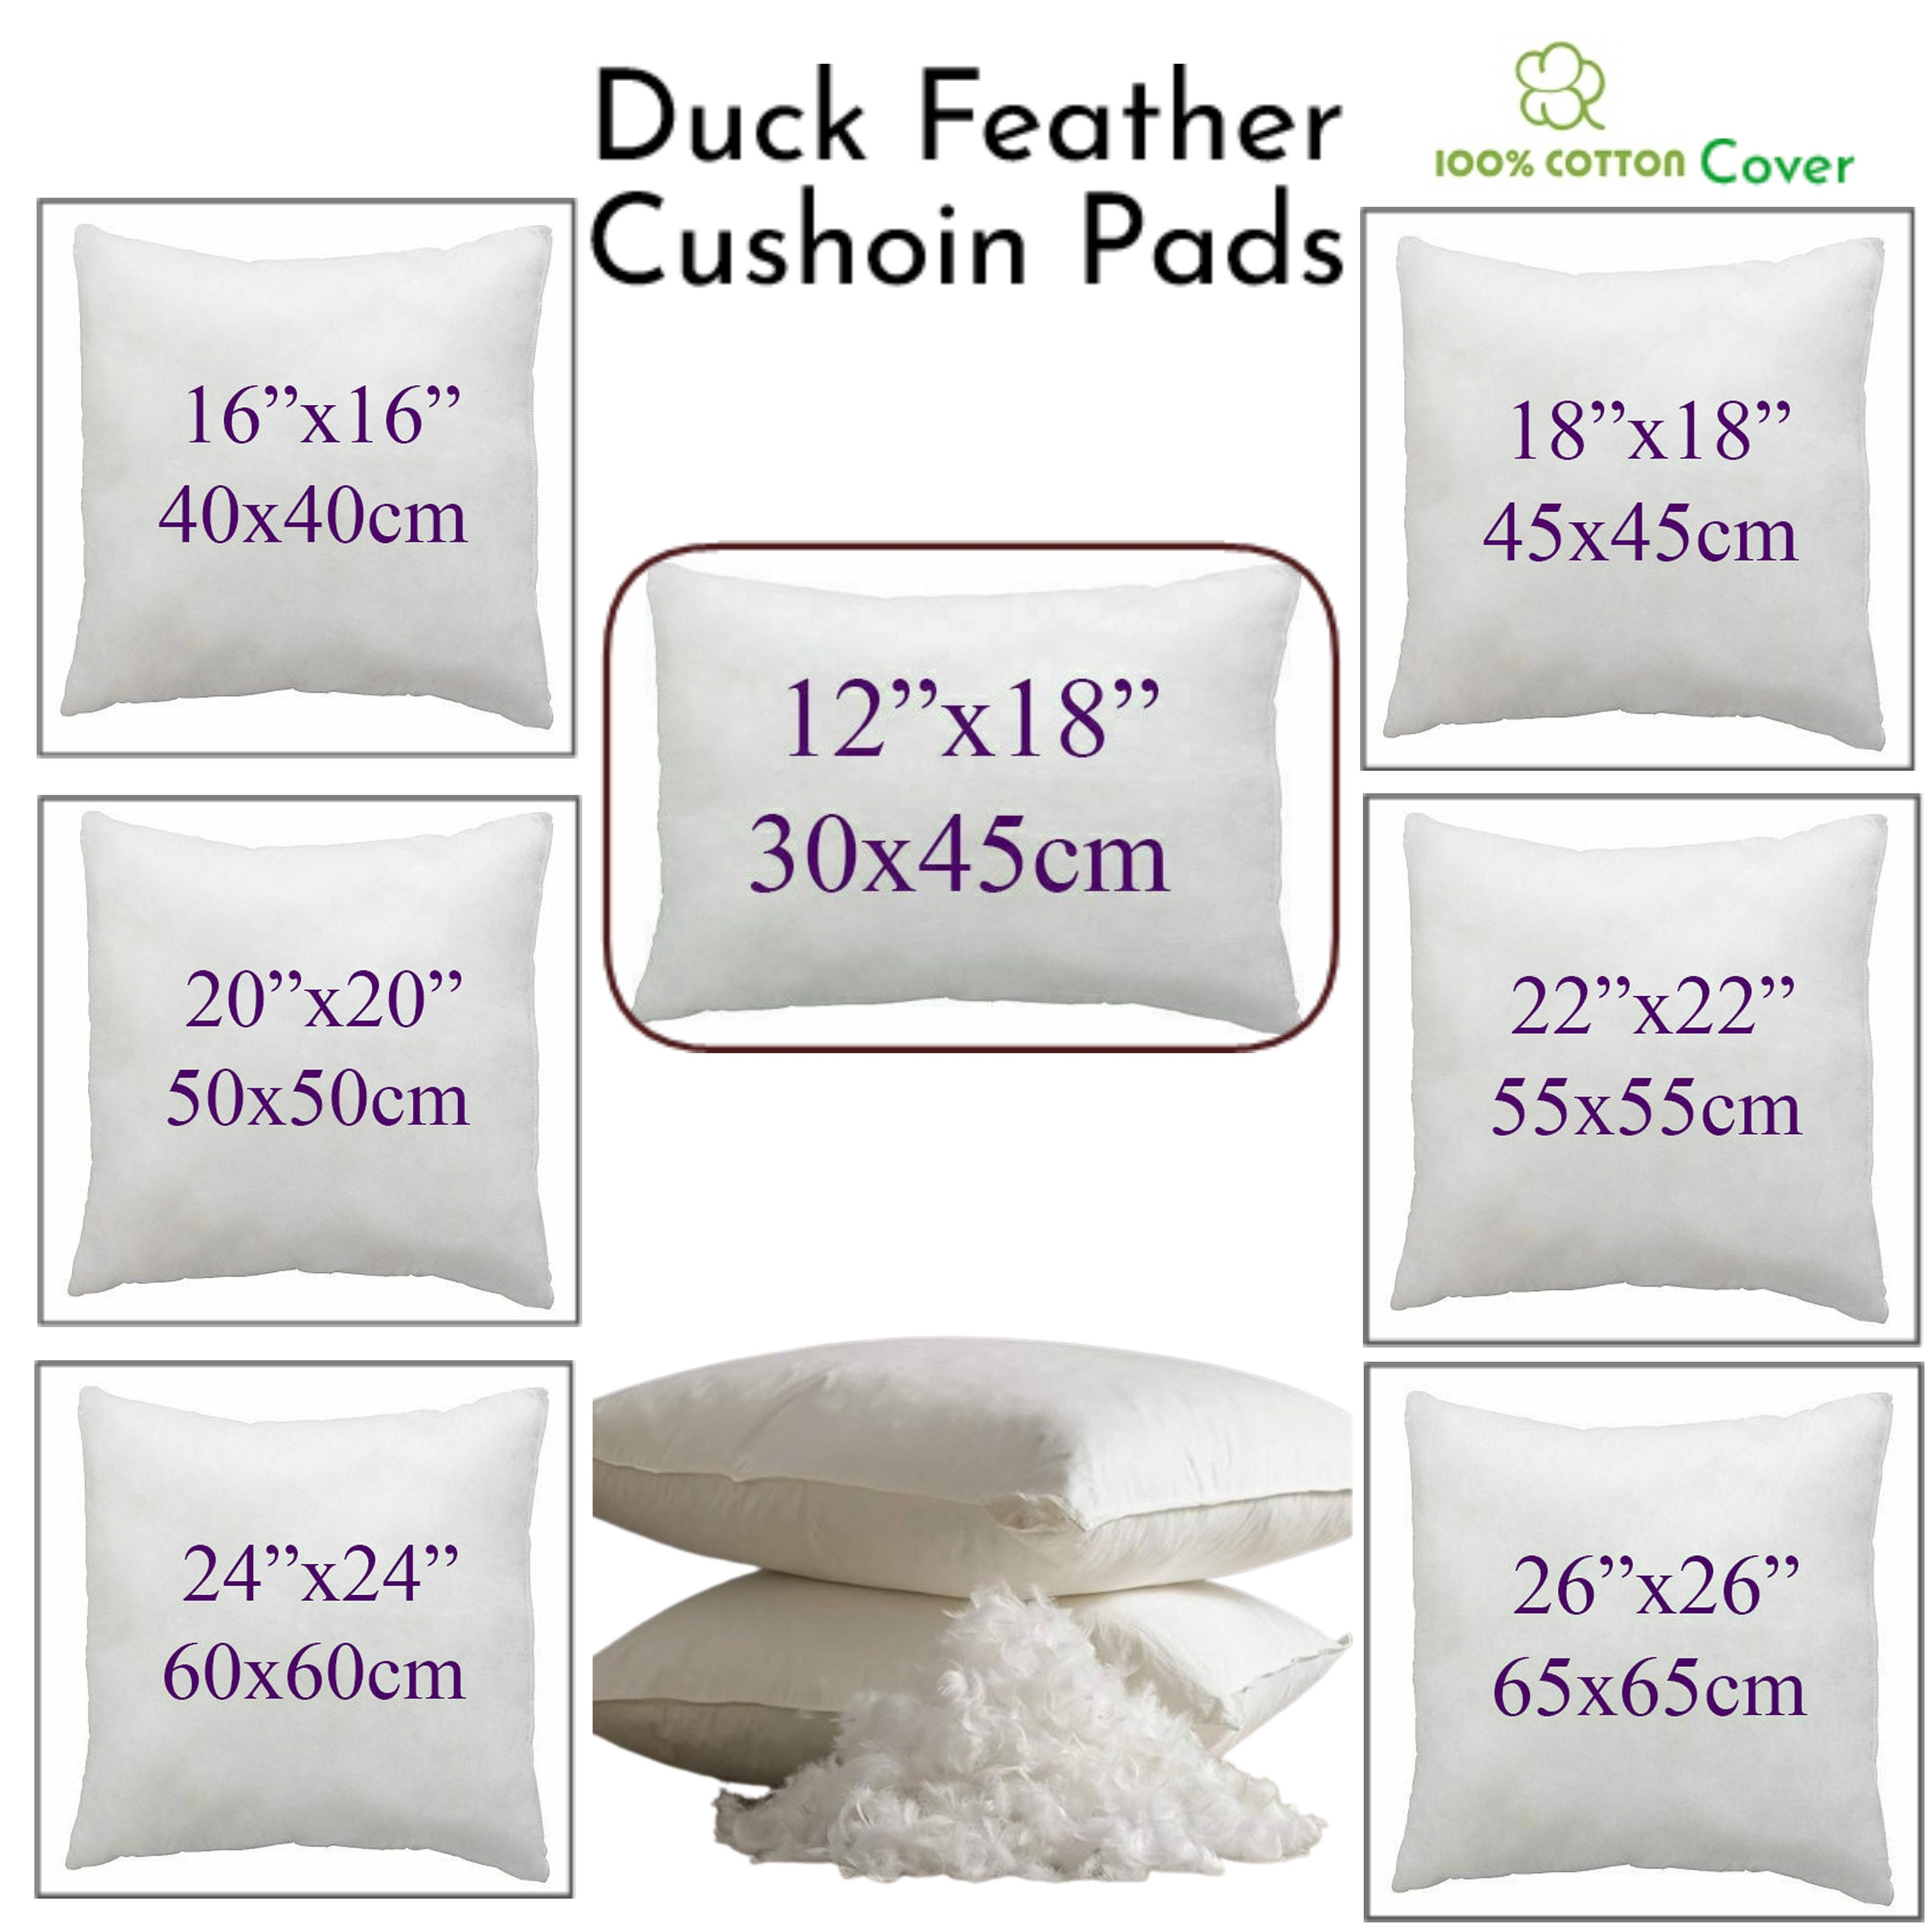 Merrick & Day Ltd. Duck Feather & Polyester Cushion Pads & also Zips